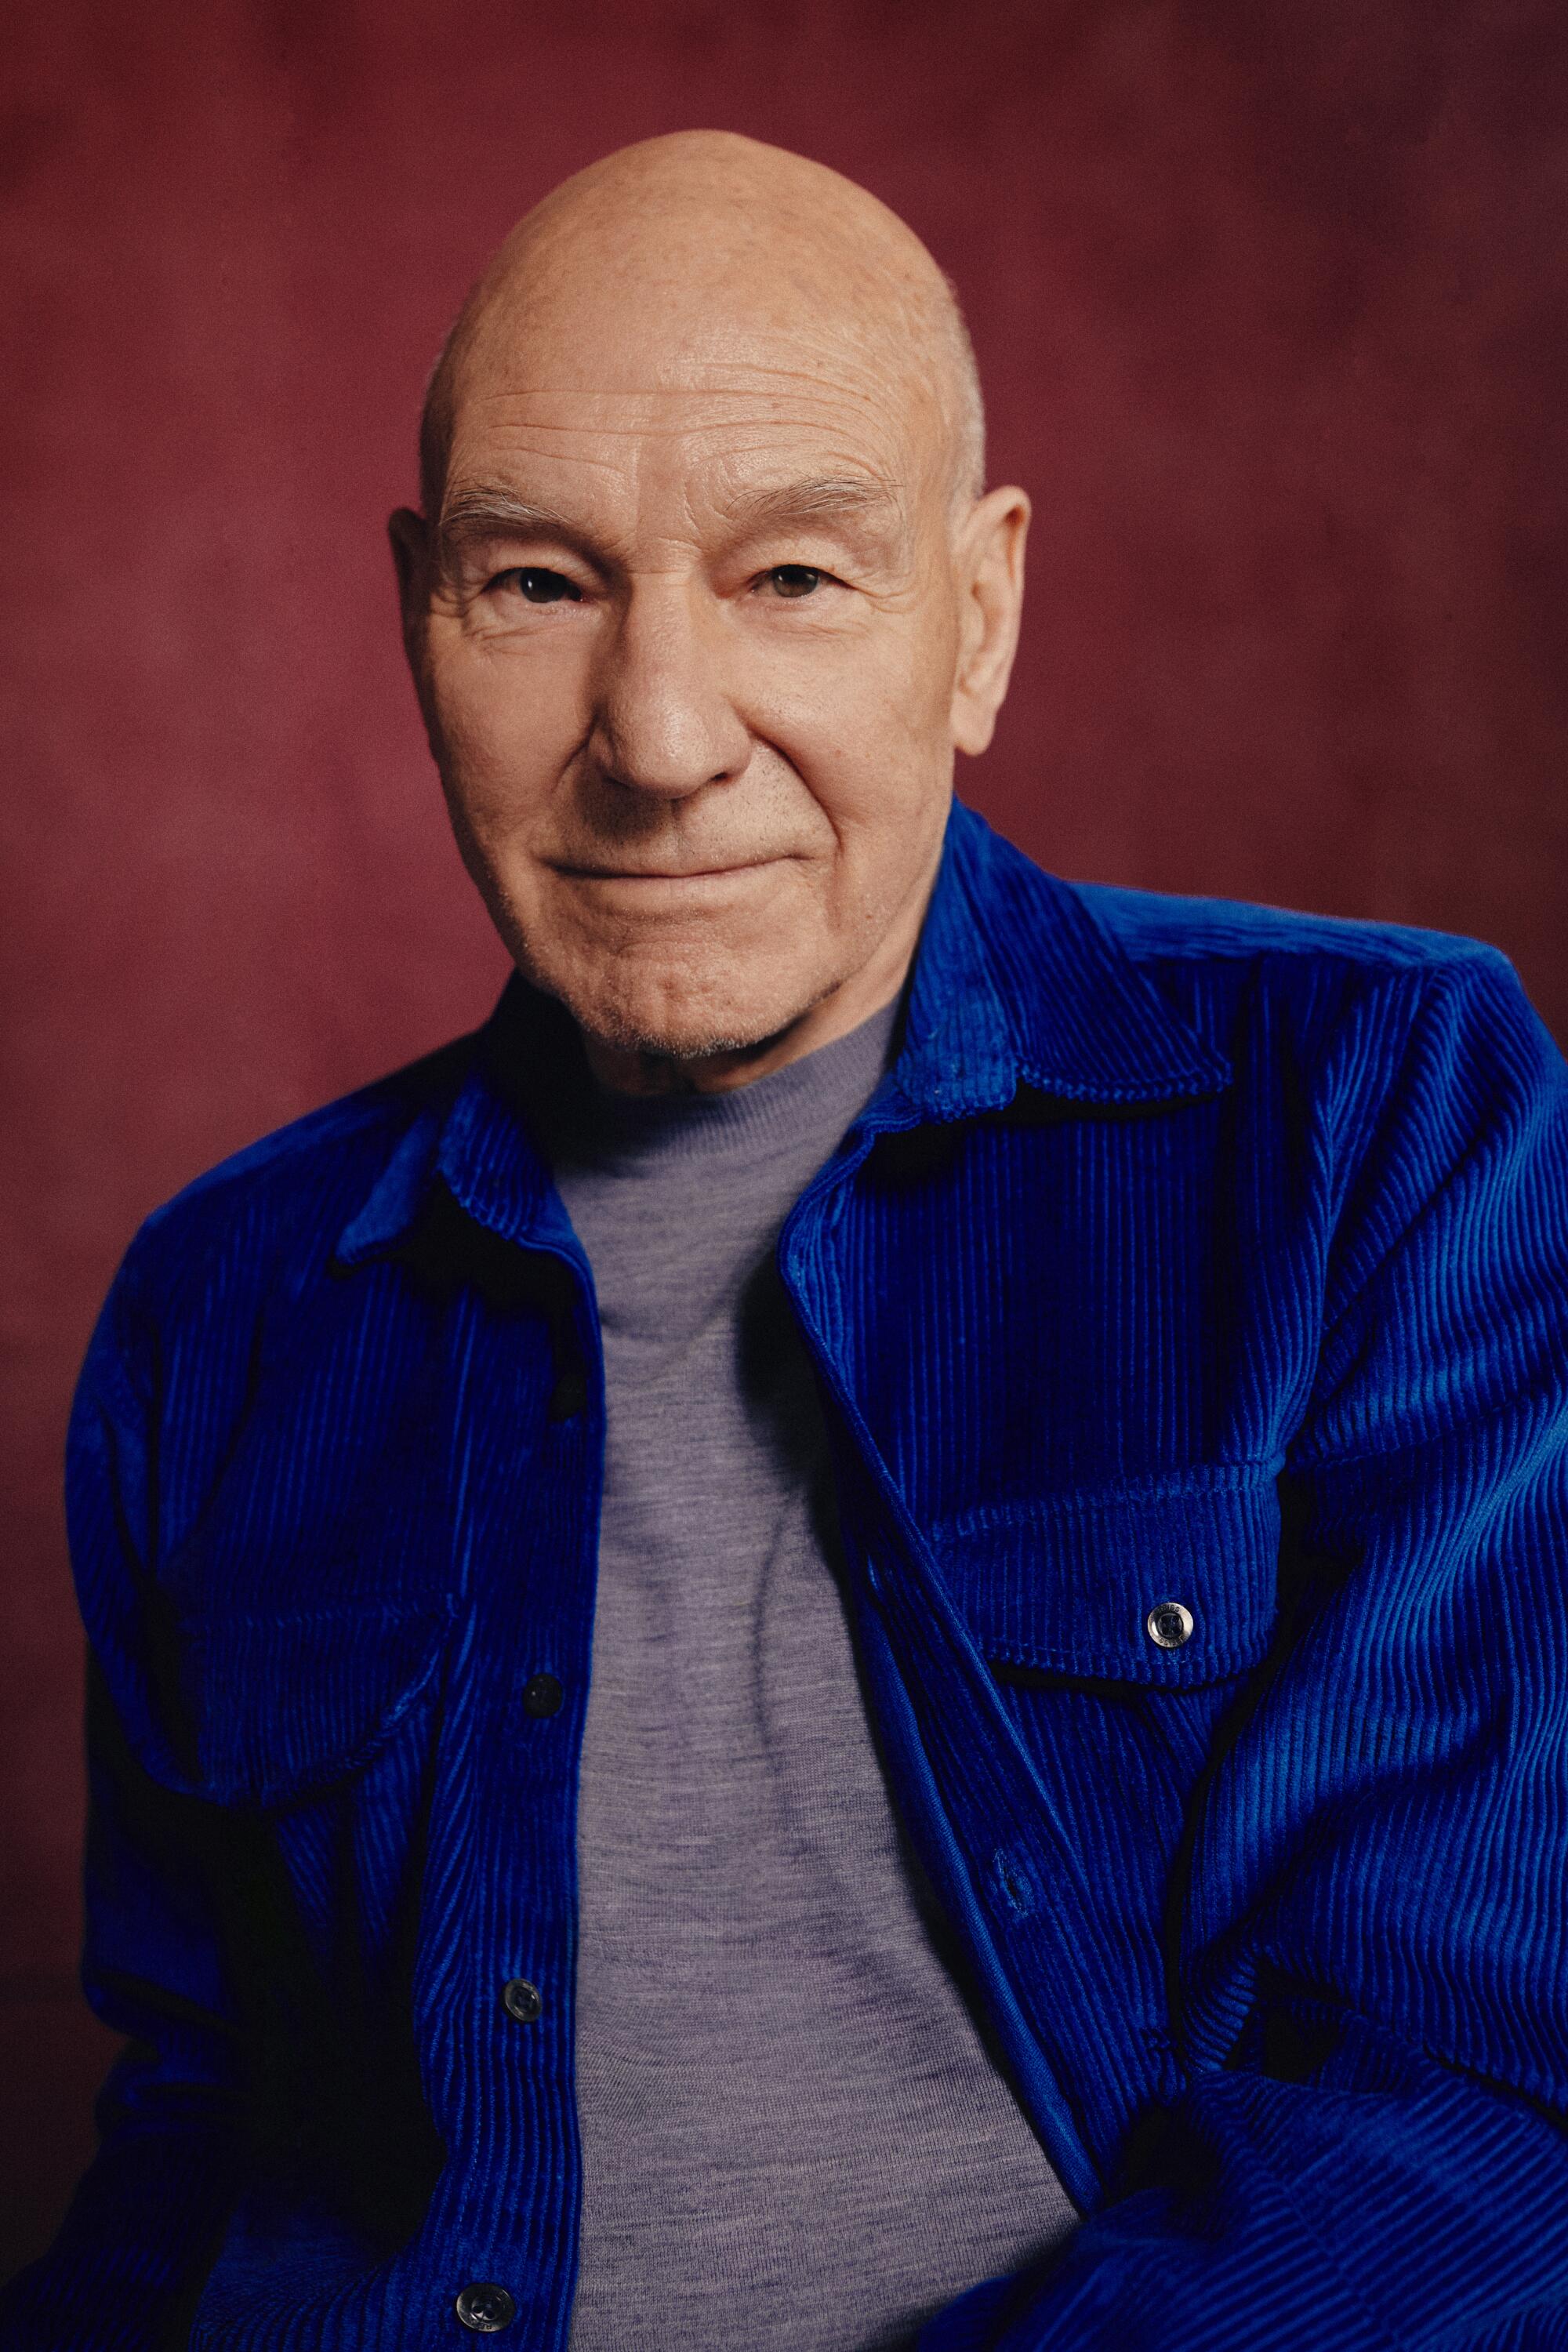 Actor Patrick Stewart in a dark blue jacket and gray T-shirt before a burgundy backdrop for a portrait.